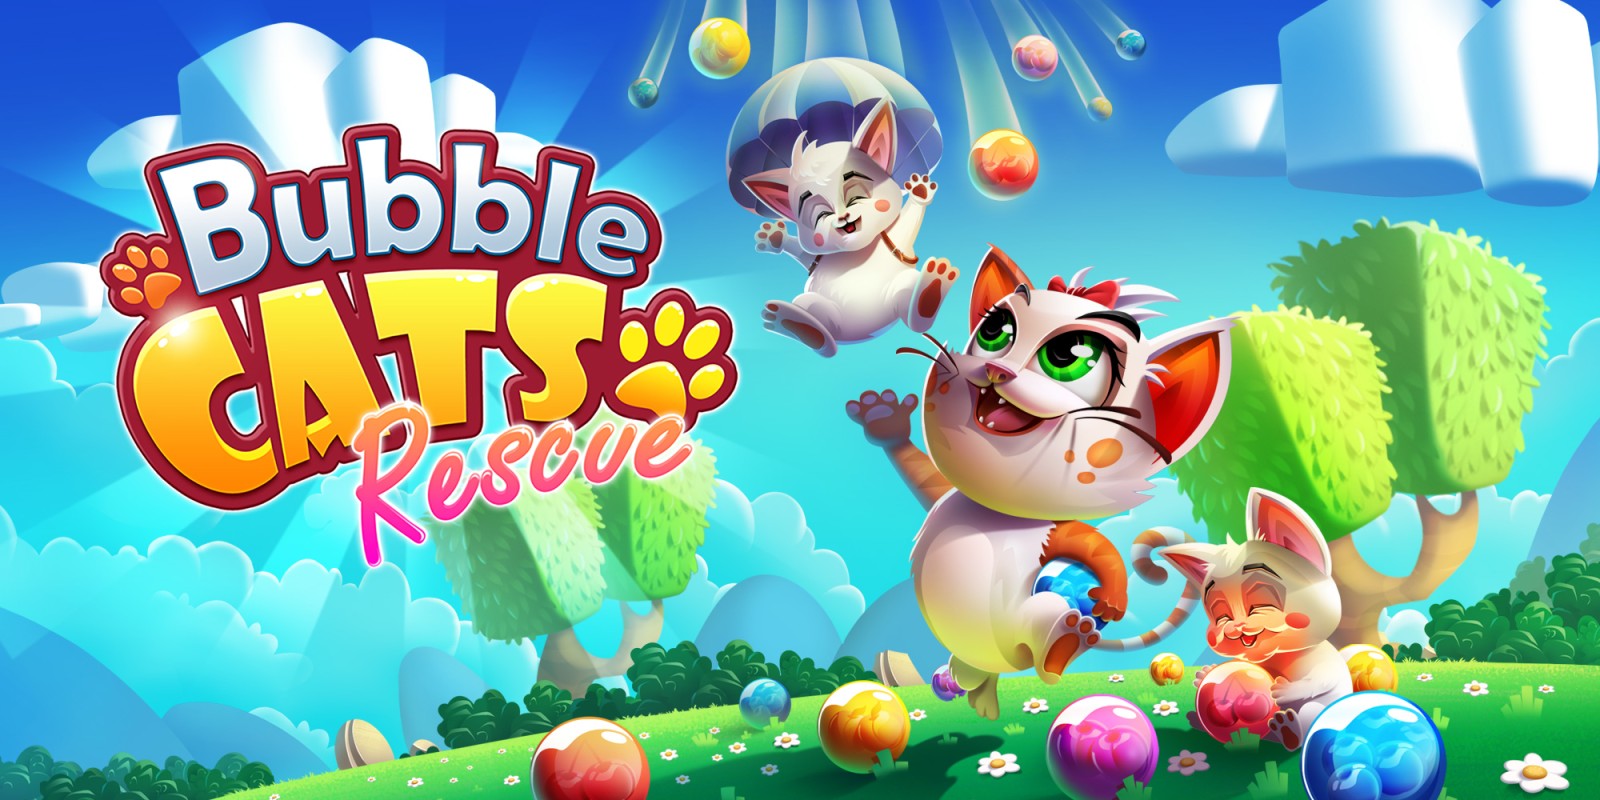 Bubble Cats Rescue Nintendo Switch download software Games Nintendo